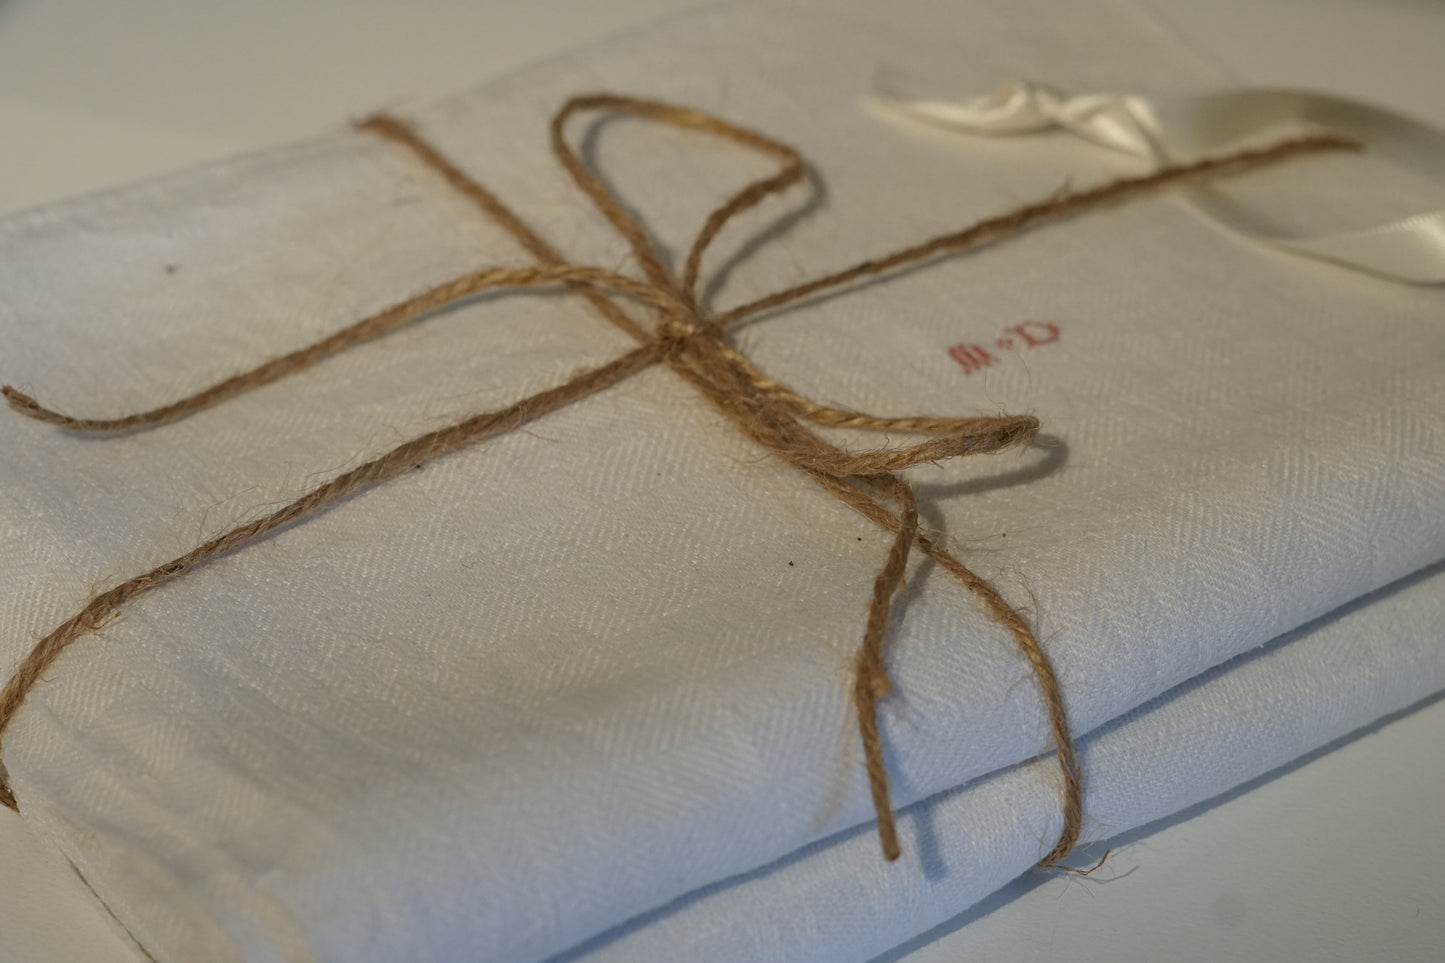 Set of 2 "MD" Embroidered Tea Towels